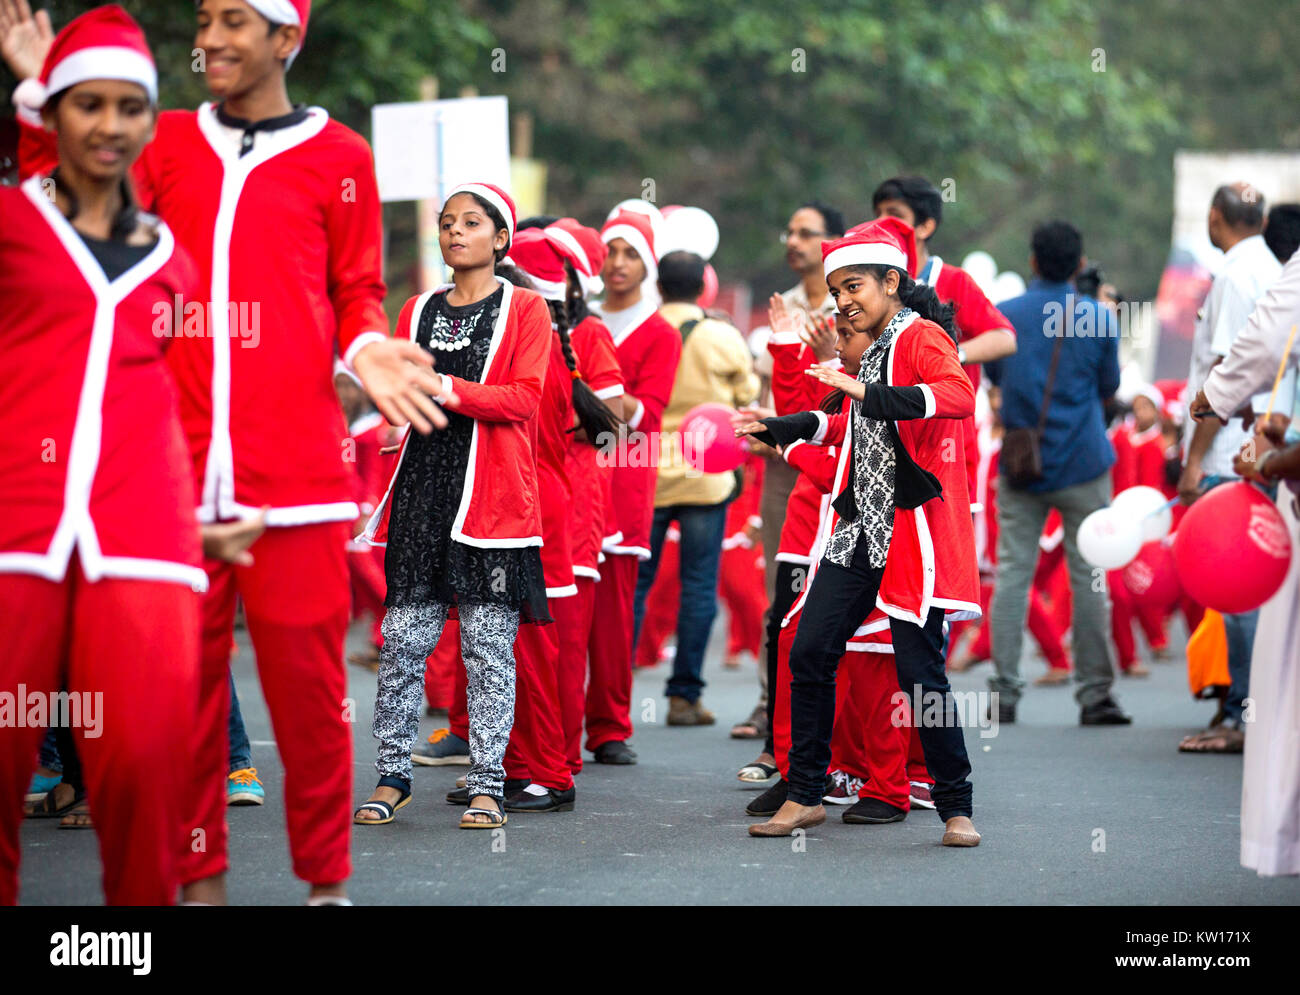 Buon Natale Thrissur.Buon Natale Thrissur High Resolution Stock Photography And Images Alamy